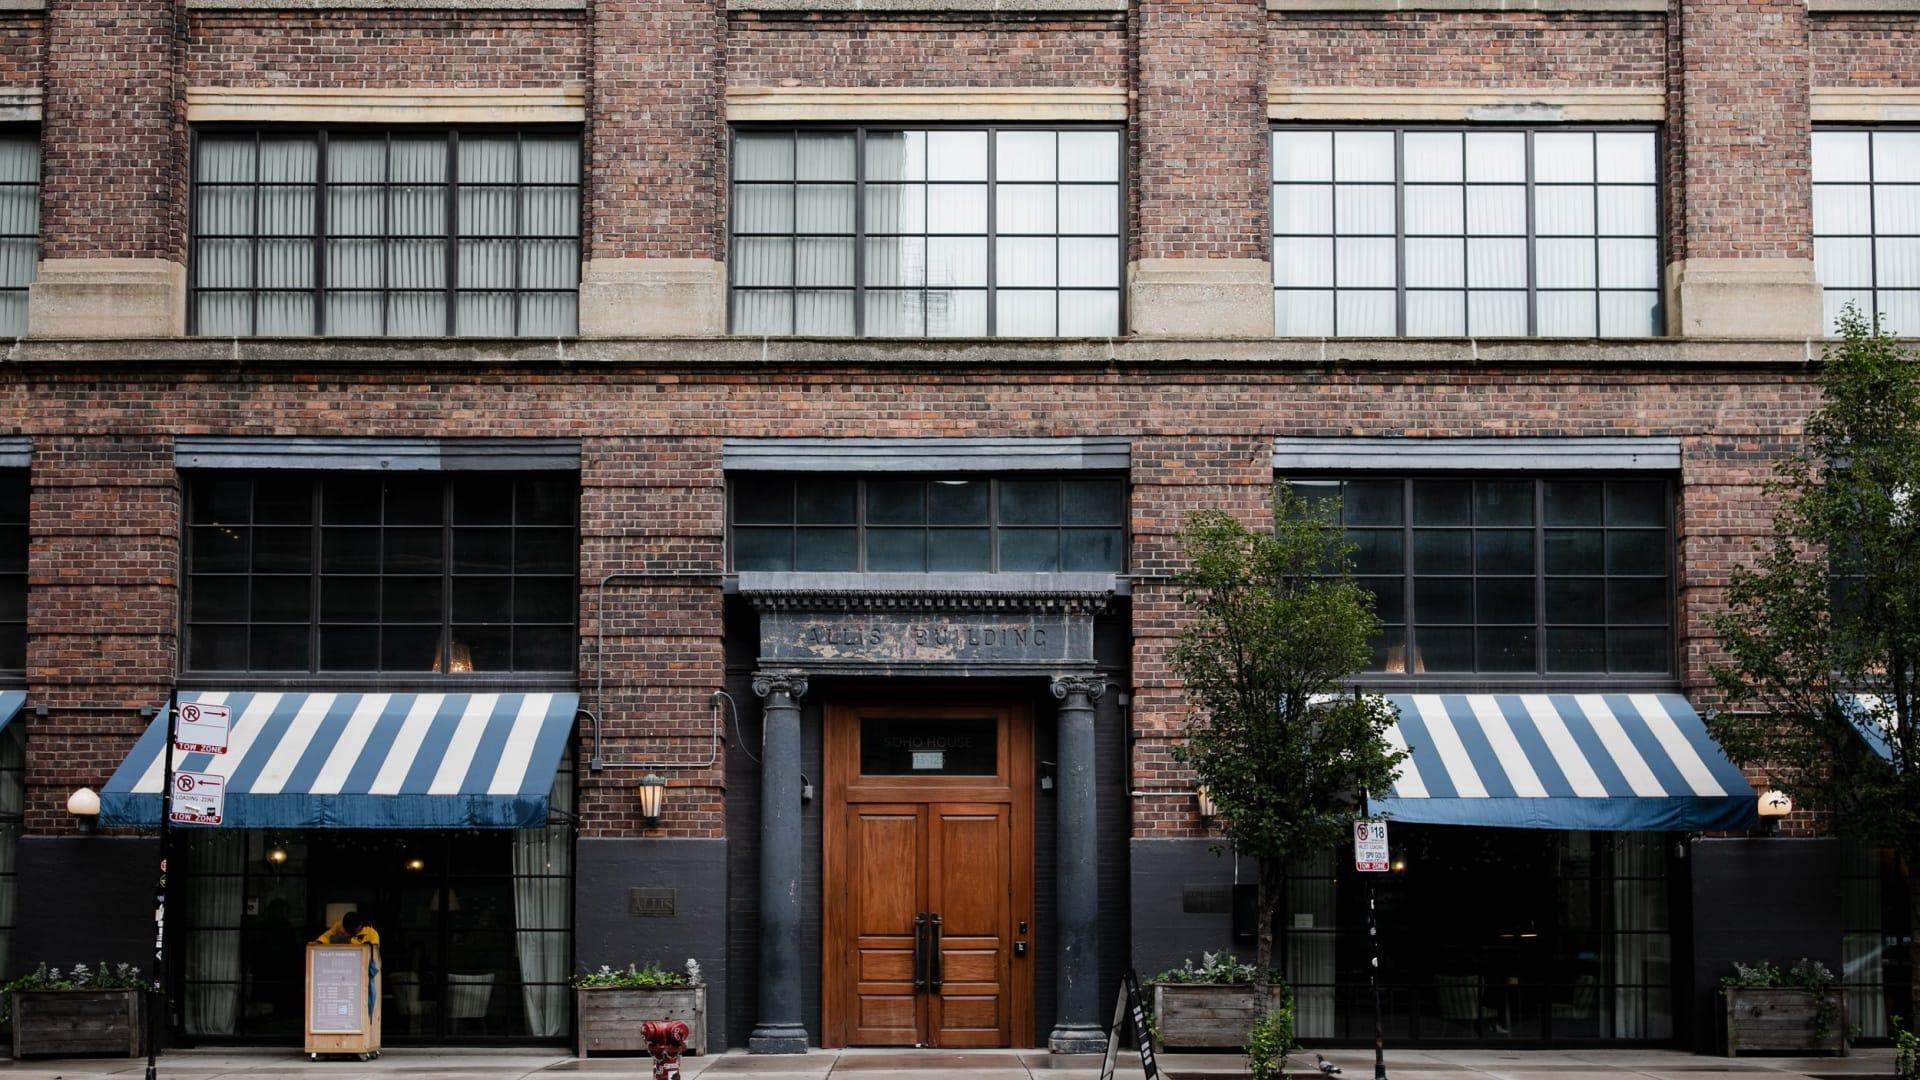 Mid shot of a brown bricked Soho house building. The focal point of the image features a brown wooden oak door with navy blue rain-washed pillars. On either side of the door is a double window, with white and navy stripped sun covers.